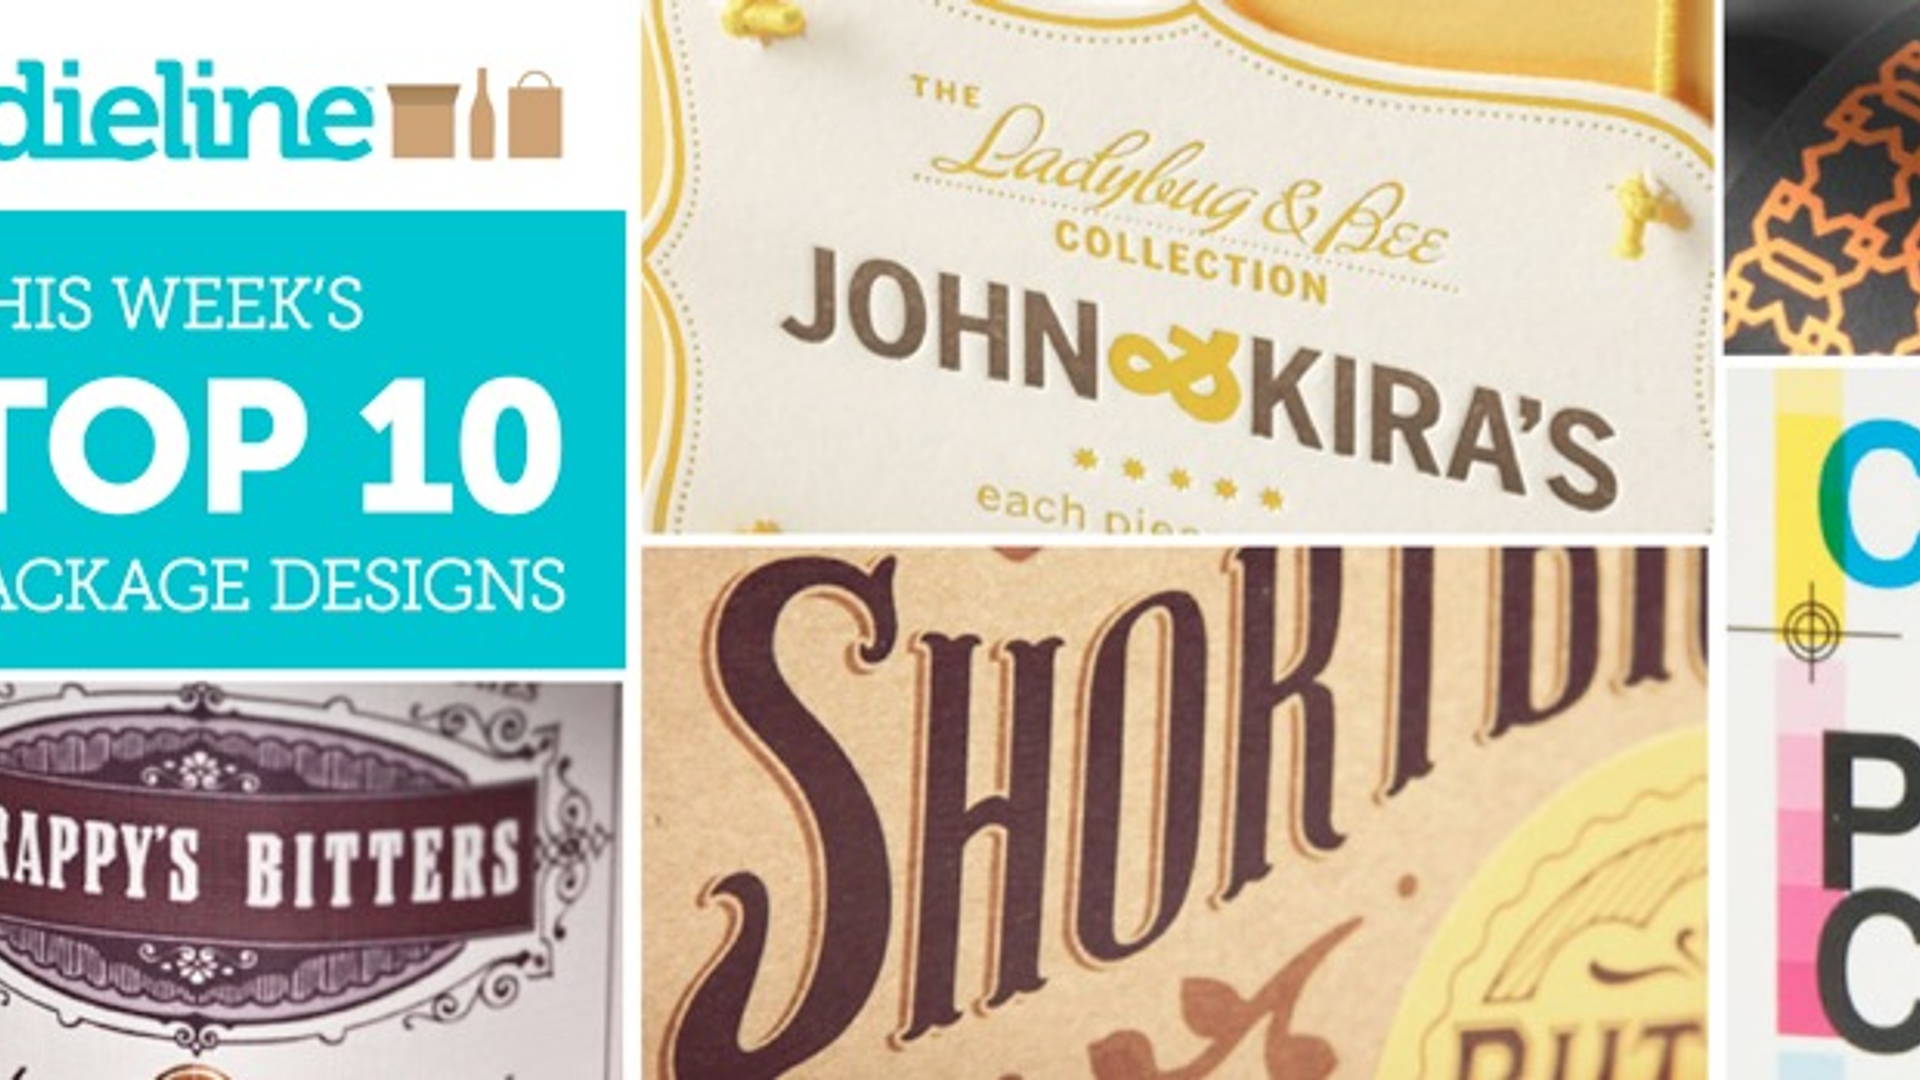 Featured image for This Week's Top 10 Package Designs 